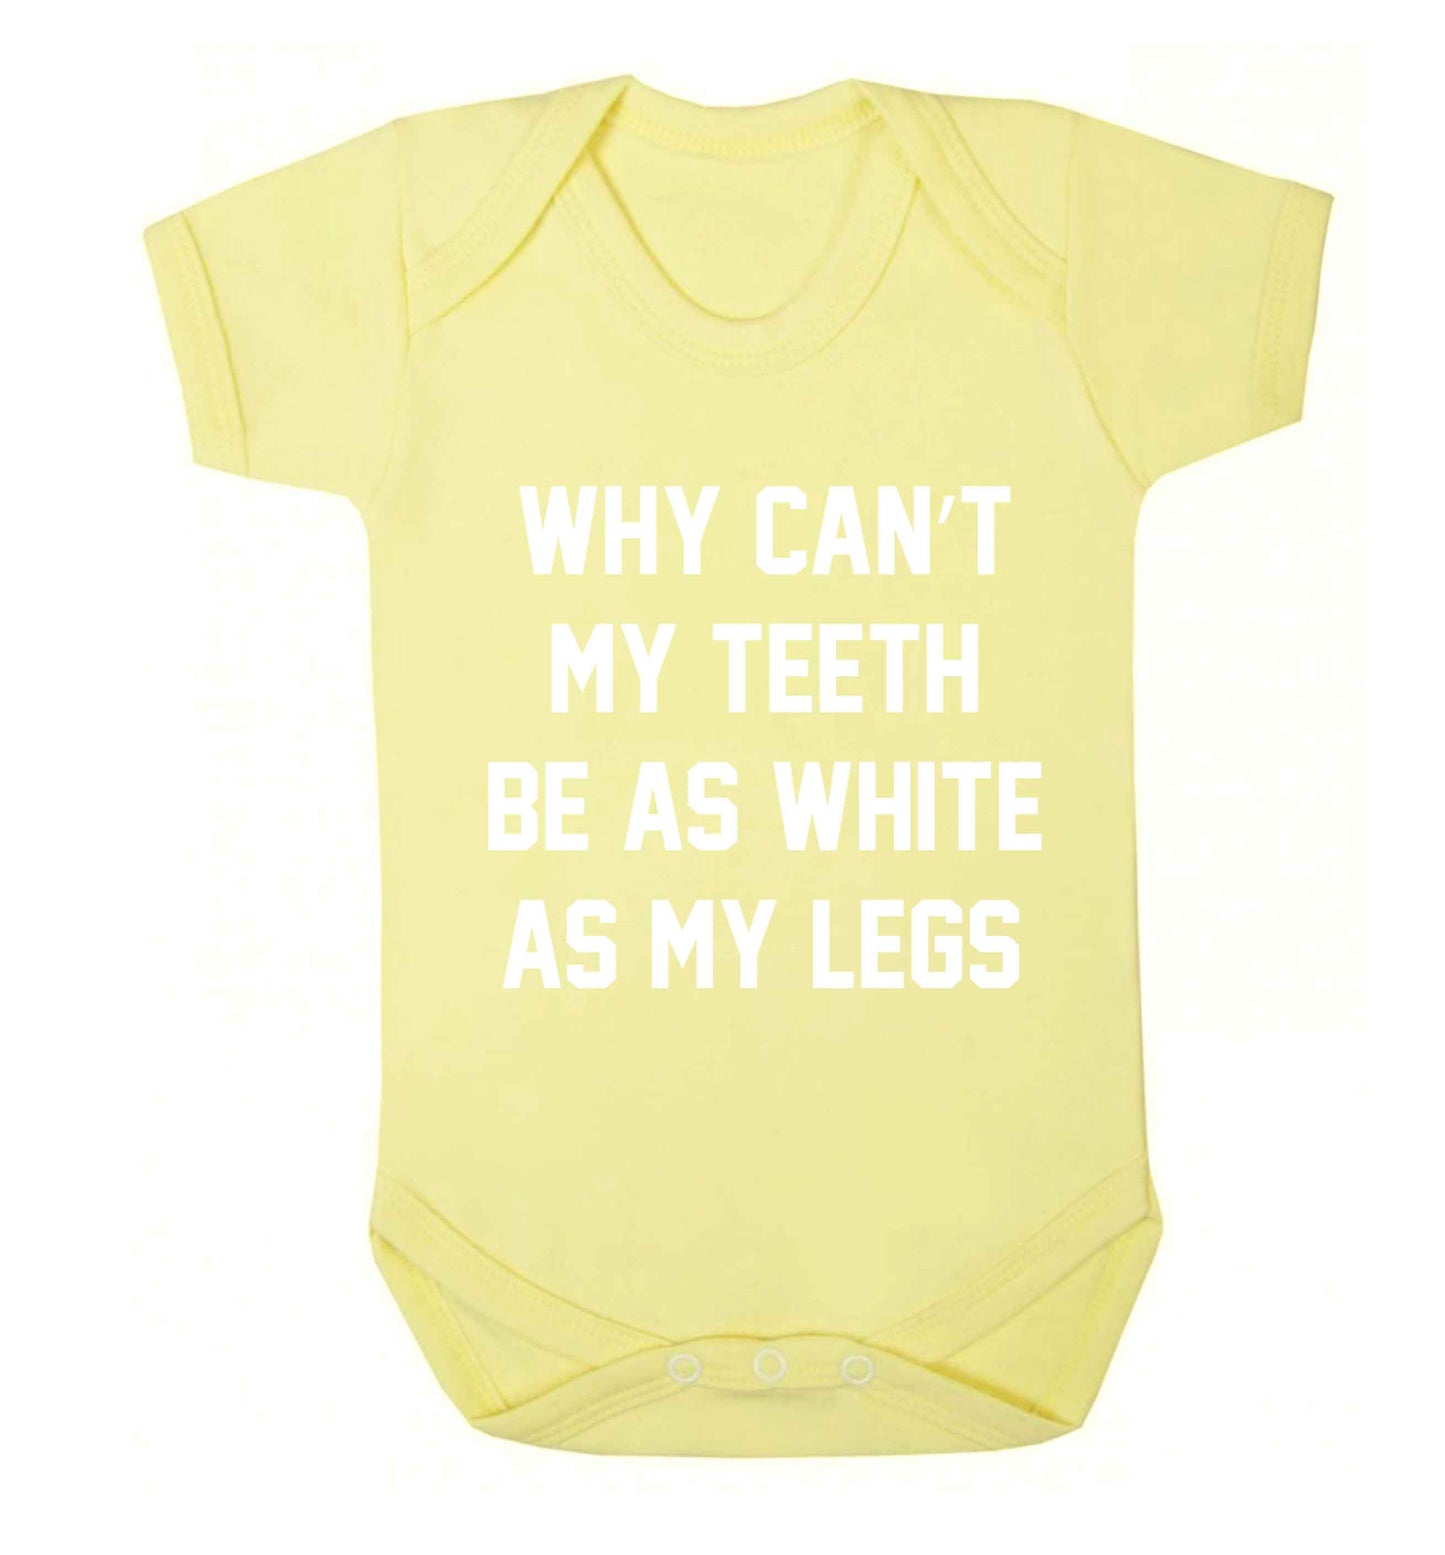 Why can't my teeth be as white as my legs Baby Vest pale yellow 18-24 months